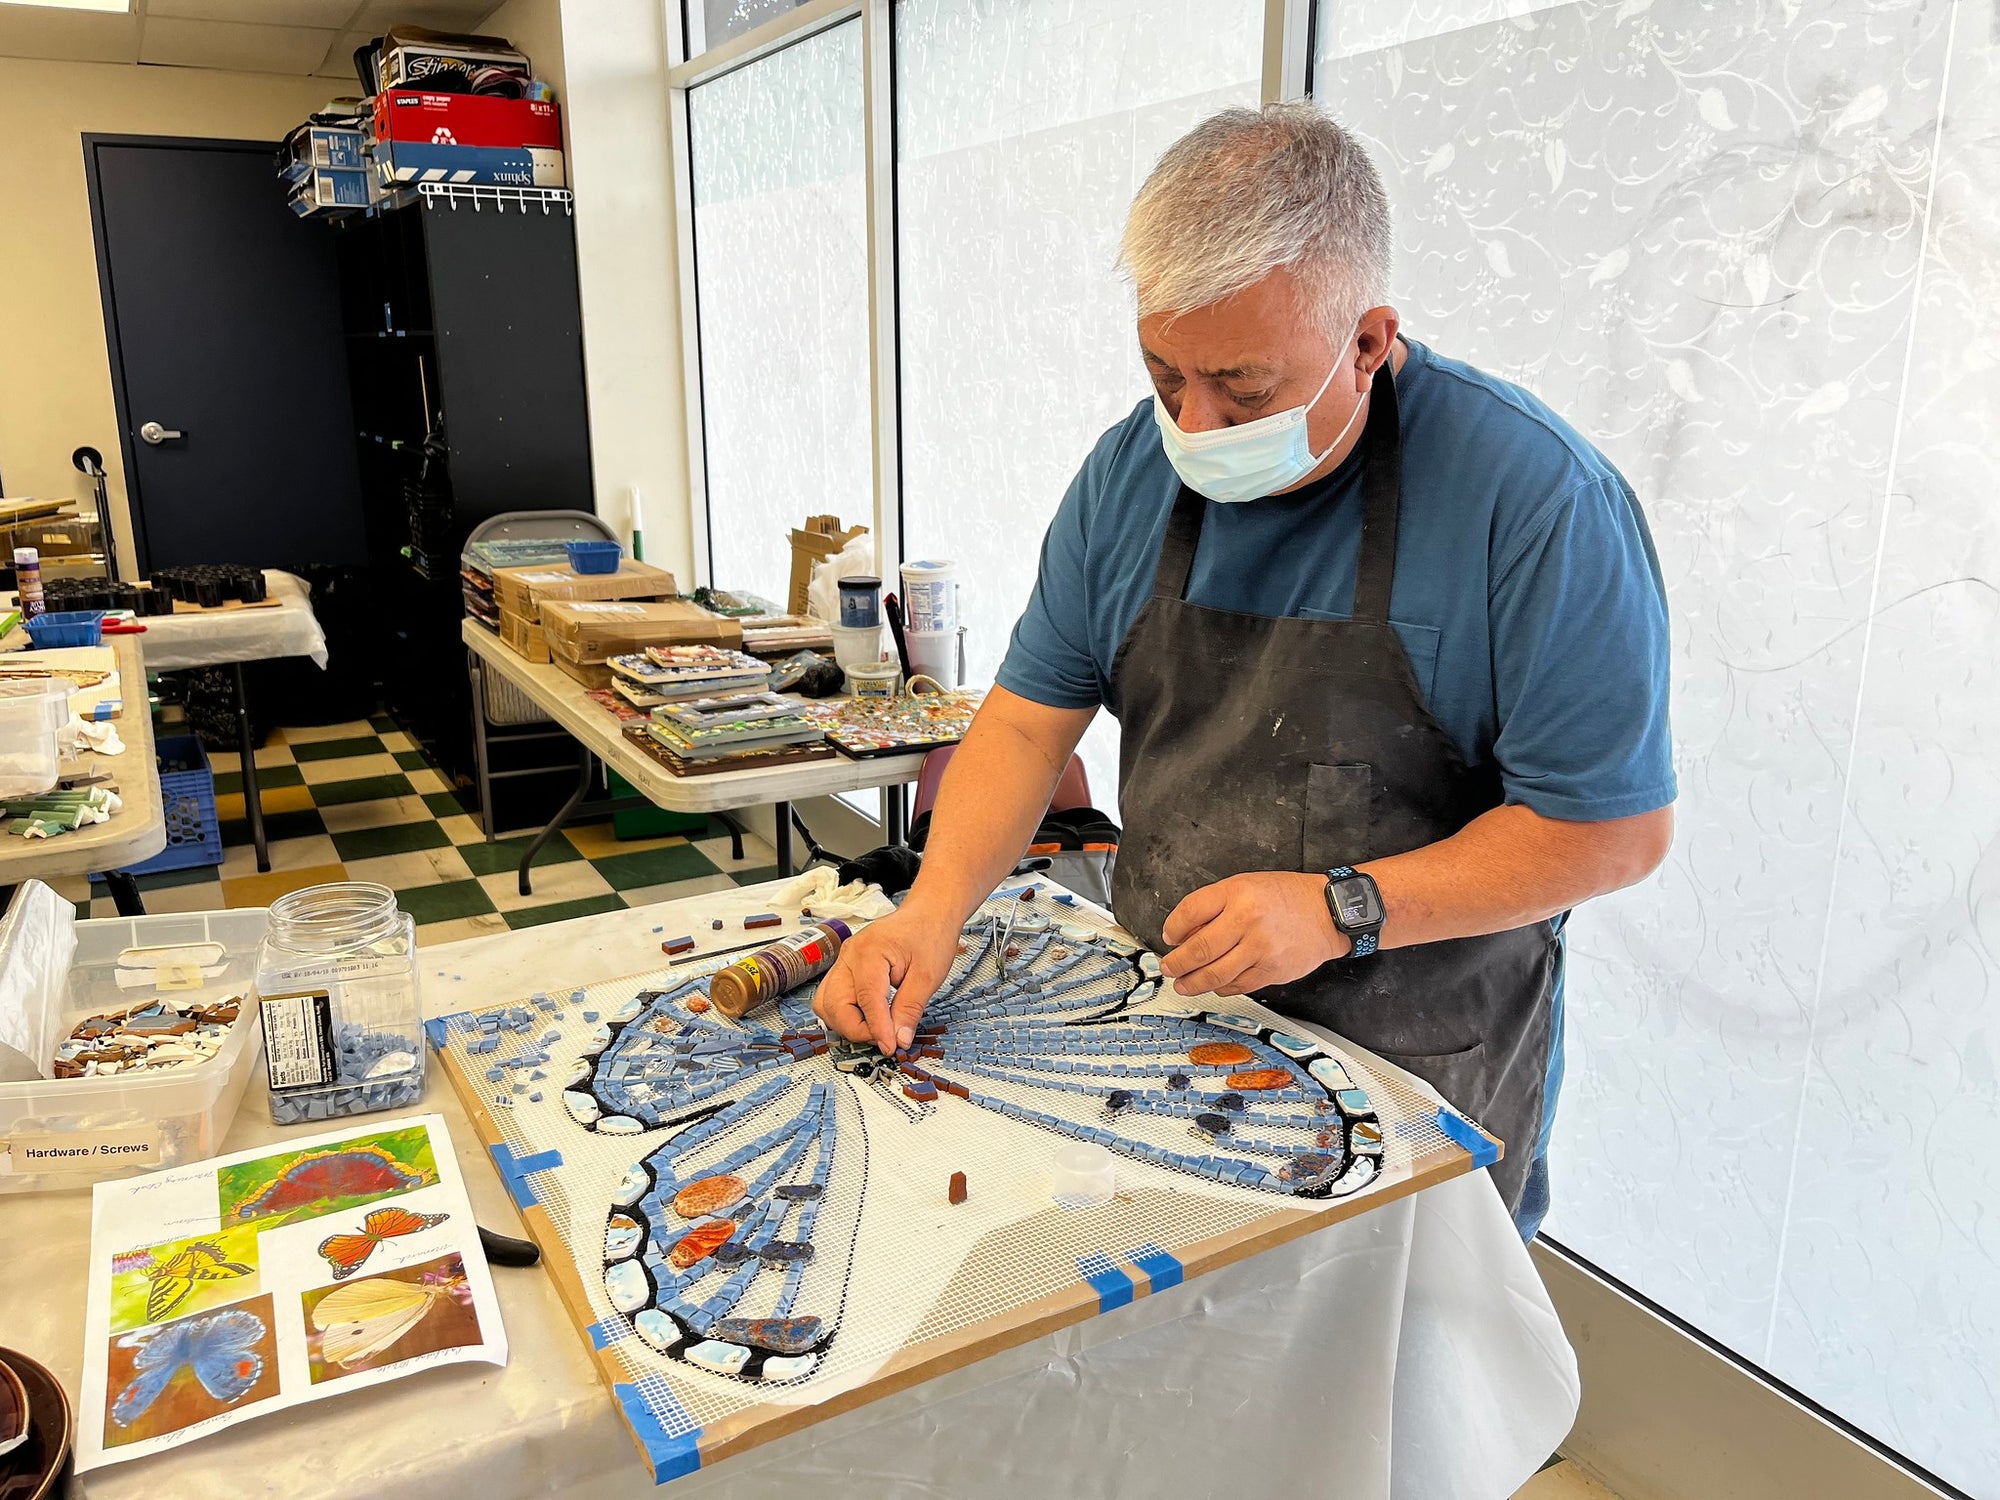 Piece by Piece artist putting together mosaic pieces to create a blue butterfly